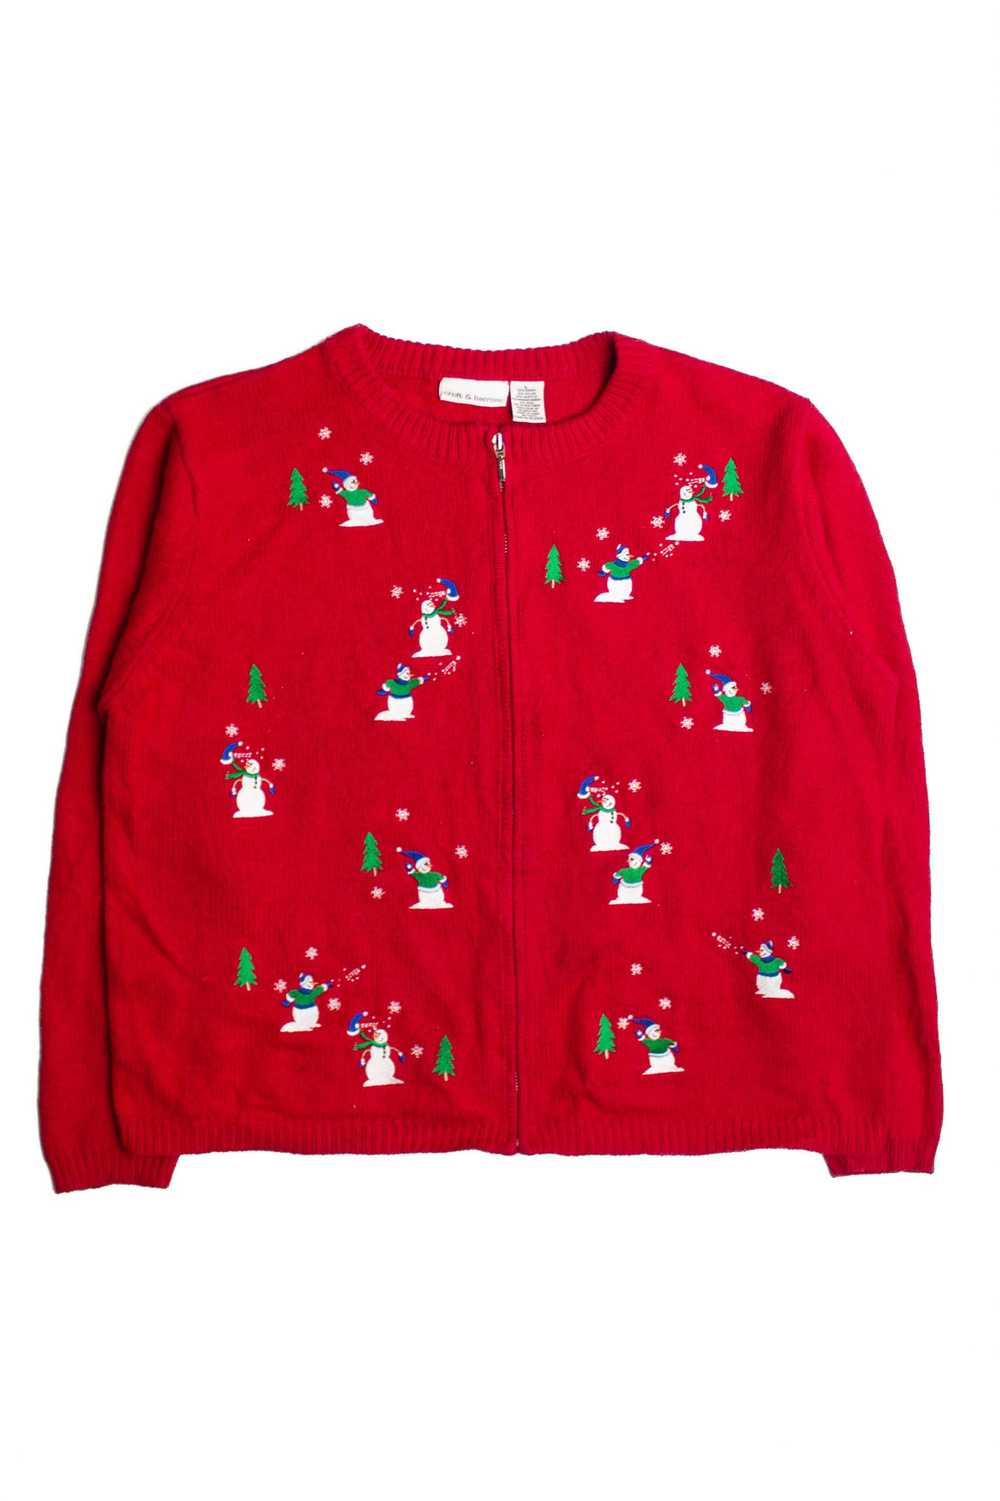 Red Ugly Christmas Sweater 60499 - image 2